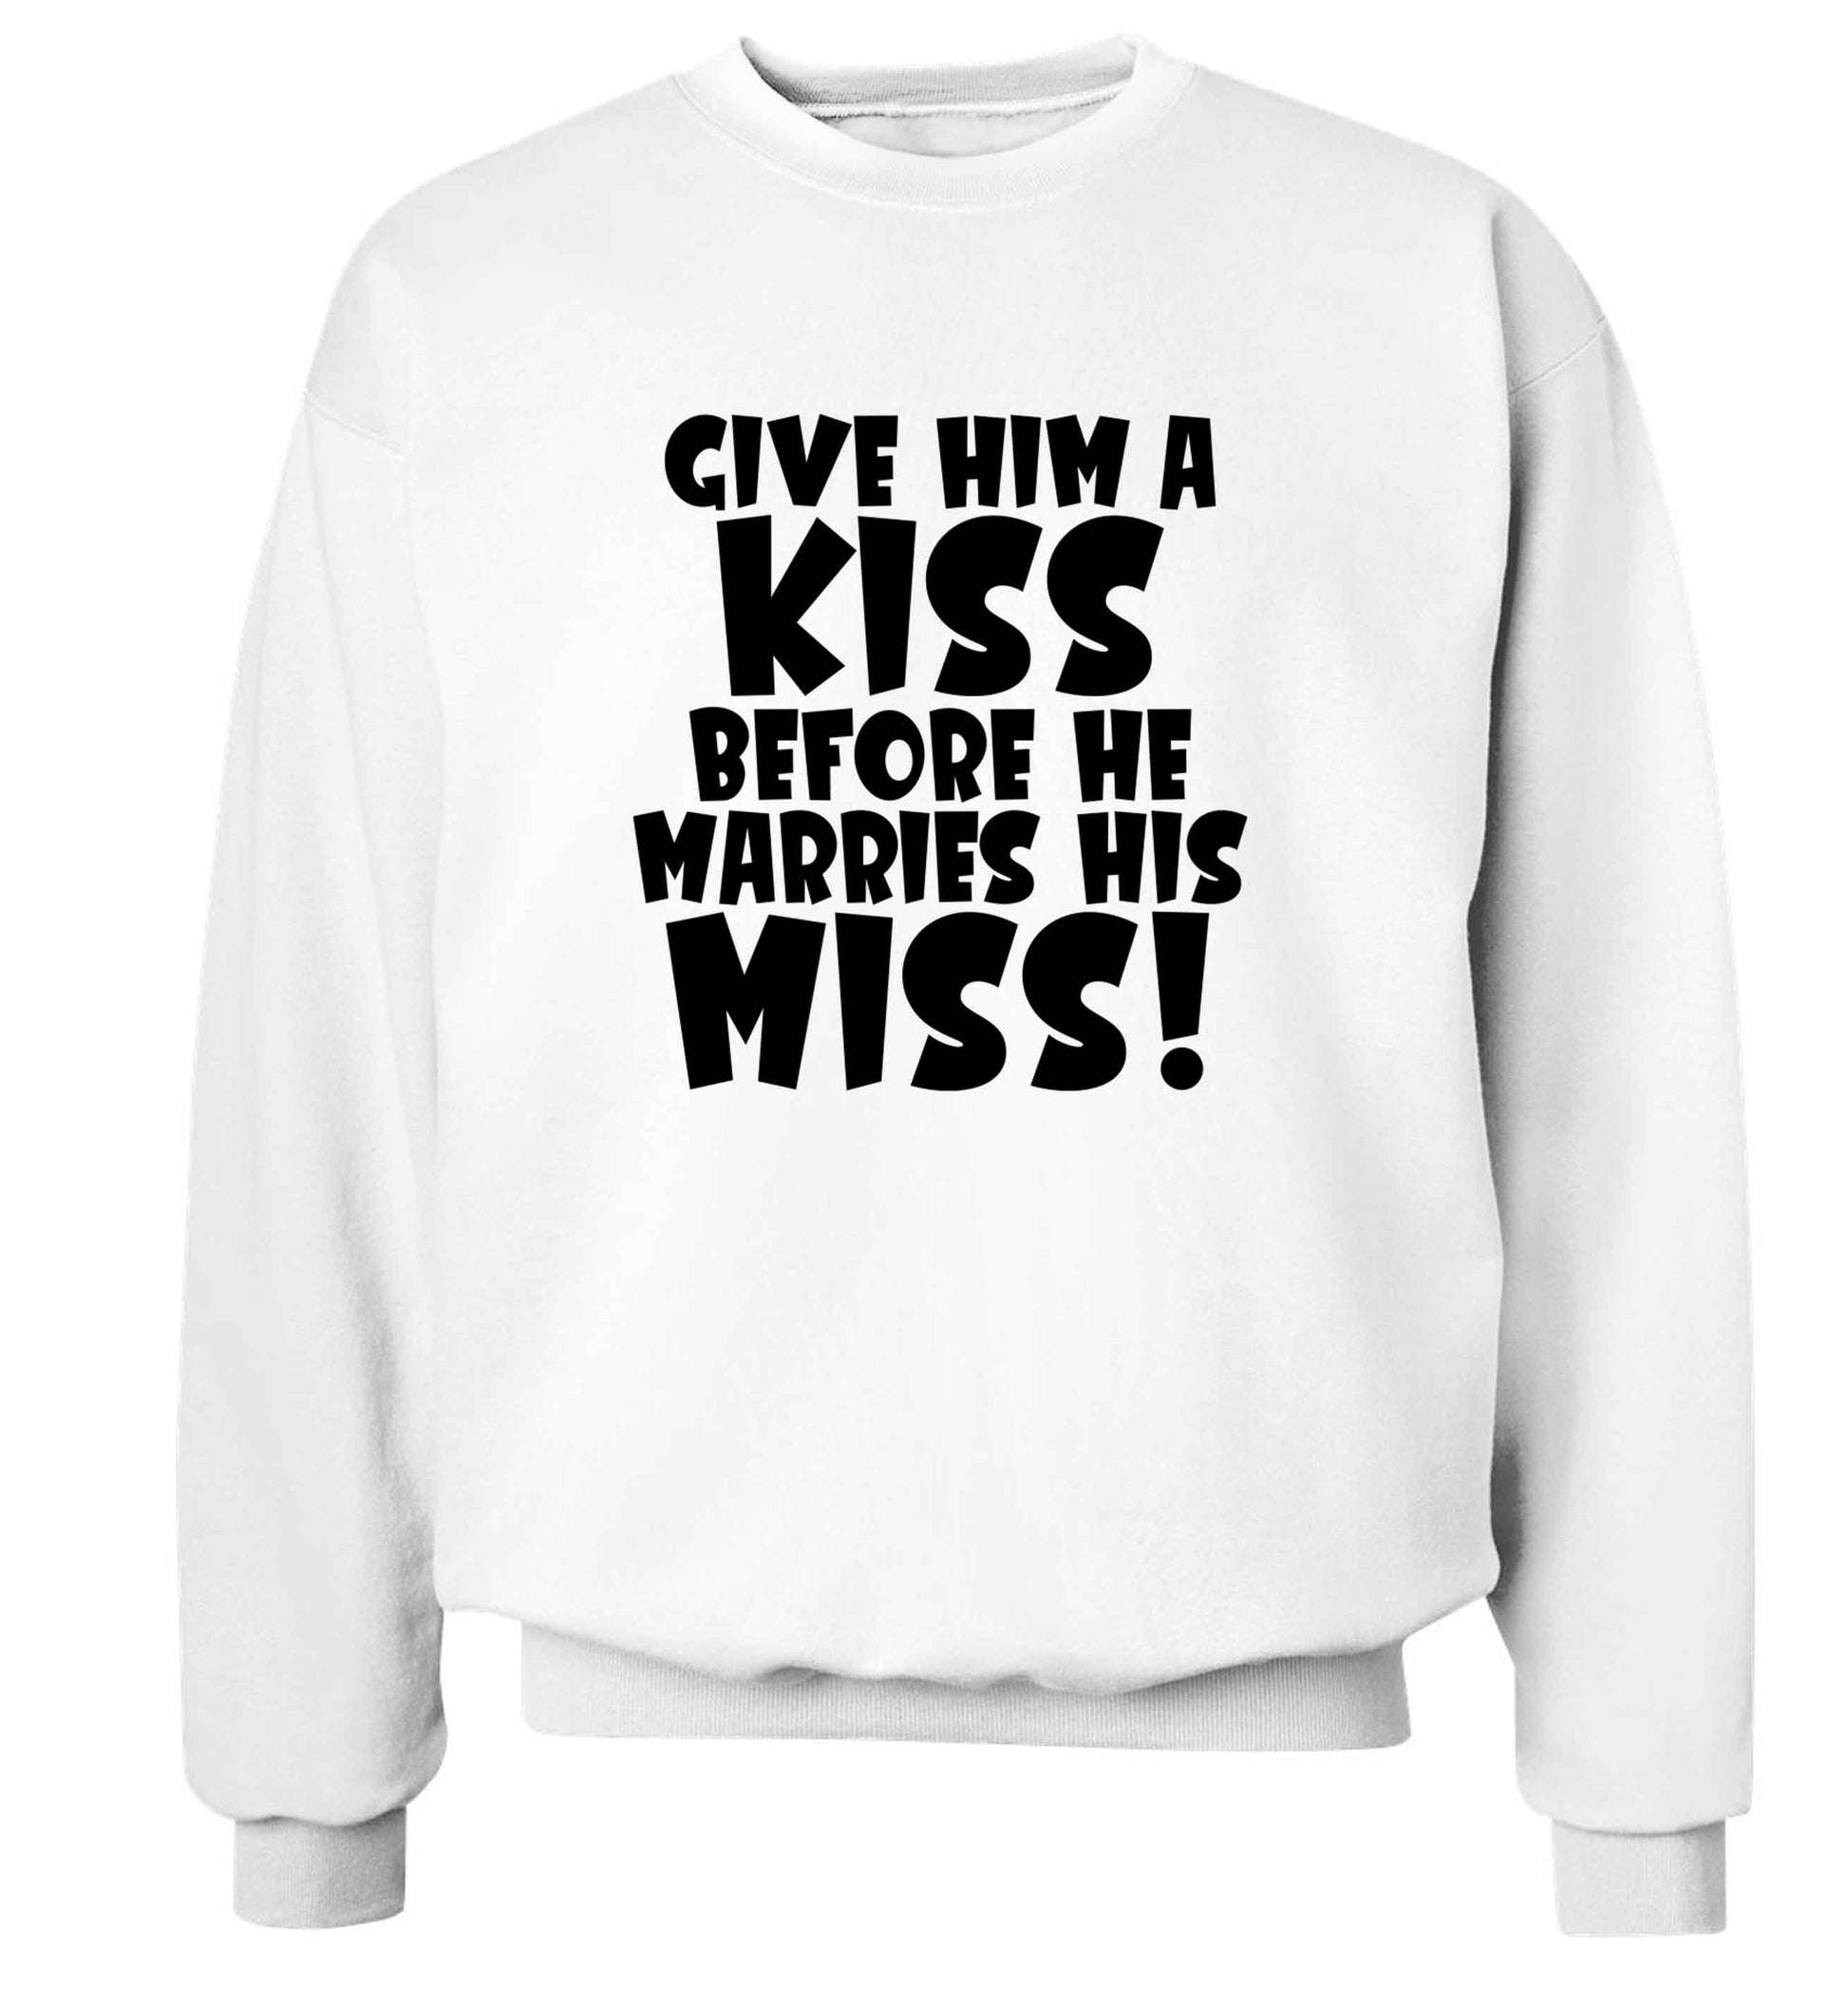 Give him a kiss before he marries his miss adult's unisex white sweater 2XL